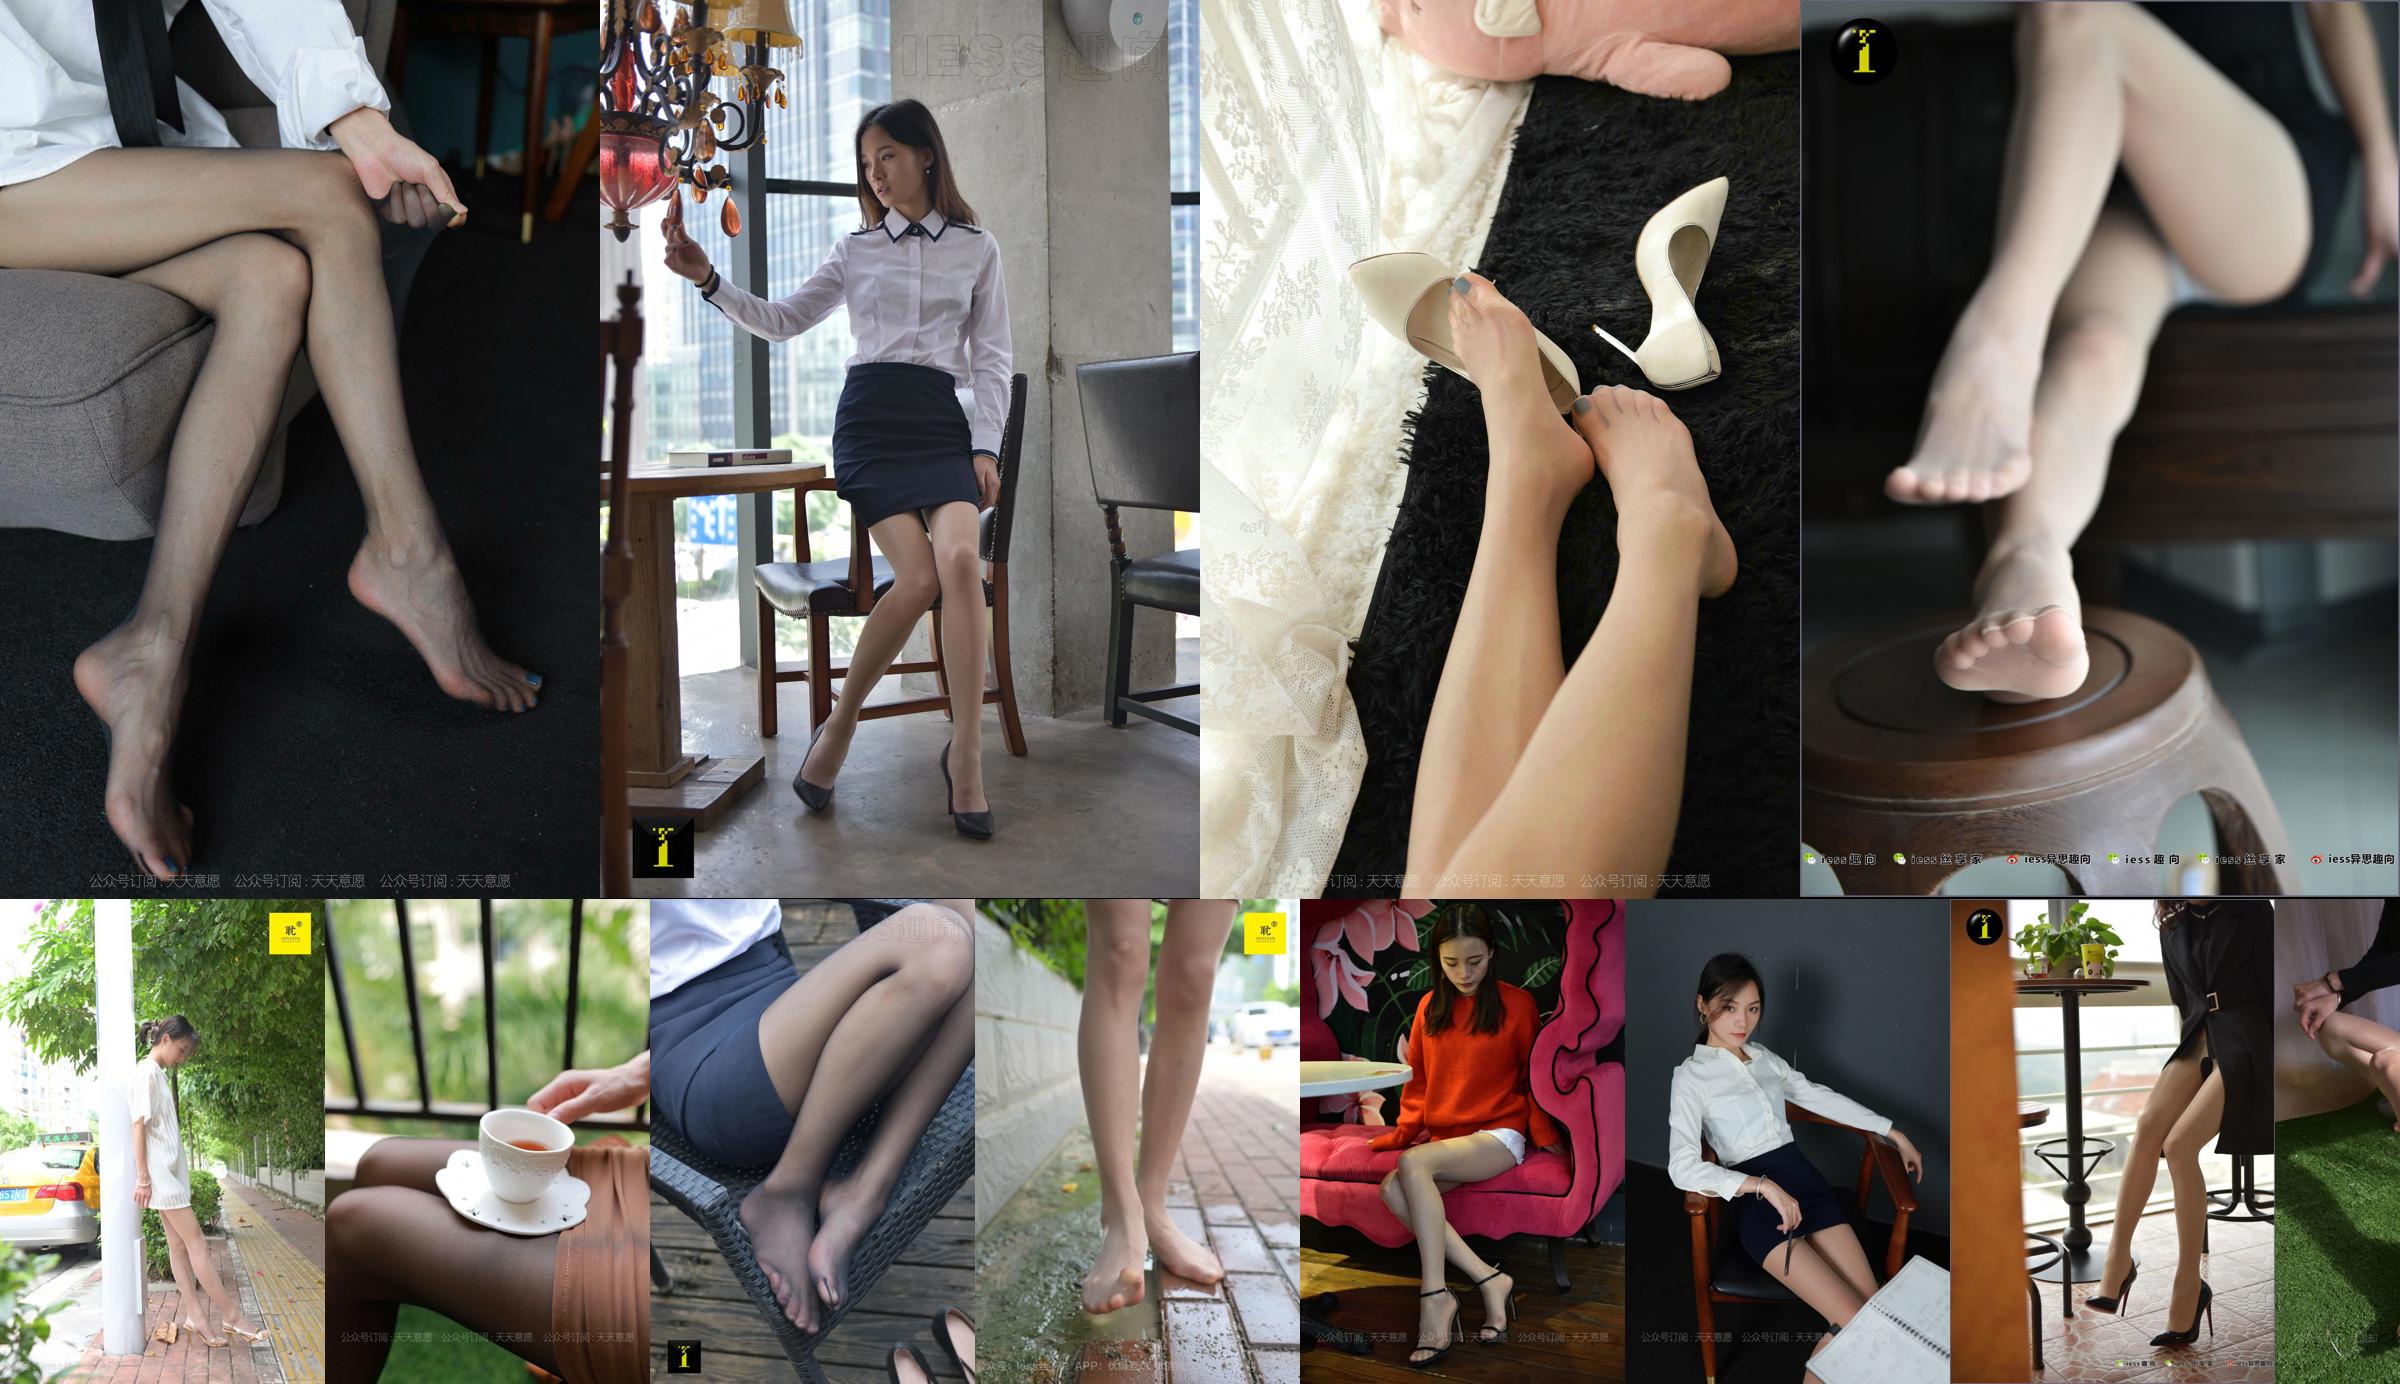 [IESS 奇思趣向] Model: Xiaoliu "The Plaid Skirt for Afternoon Tea" No.a0584d Page 1